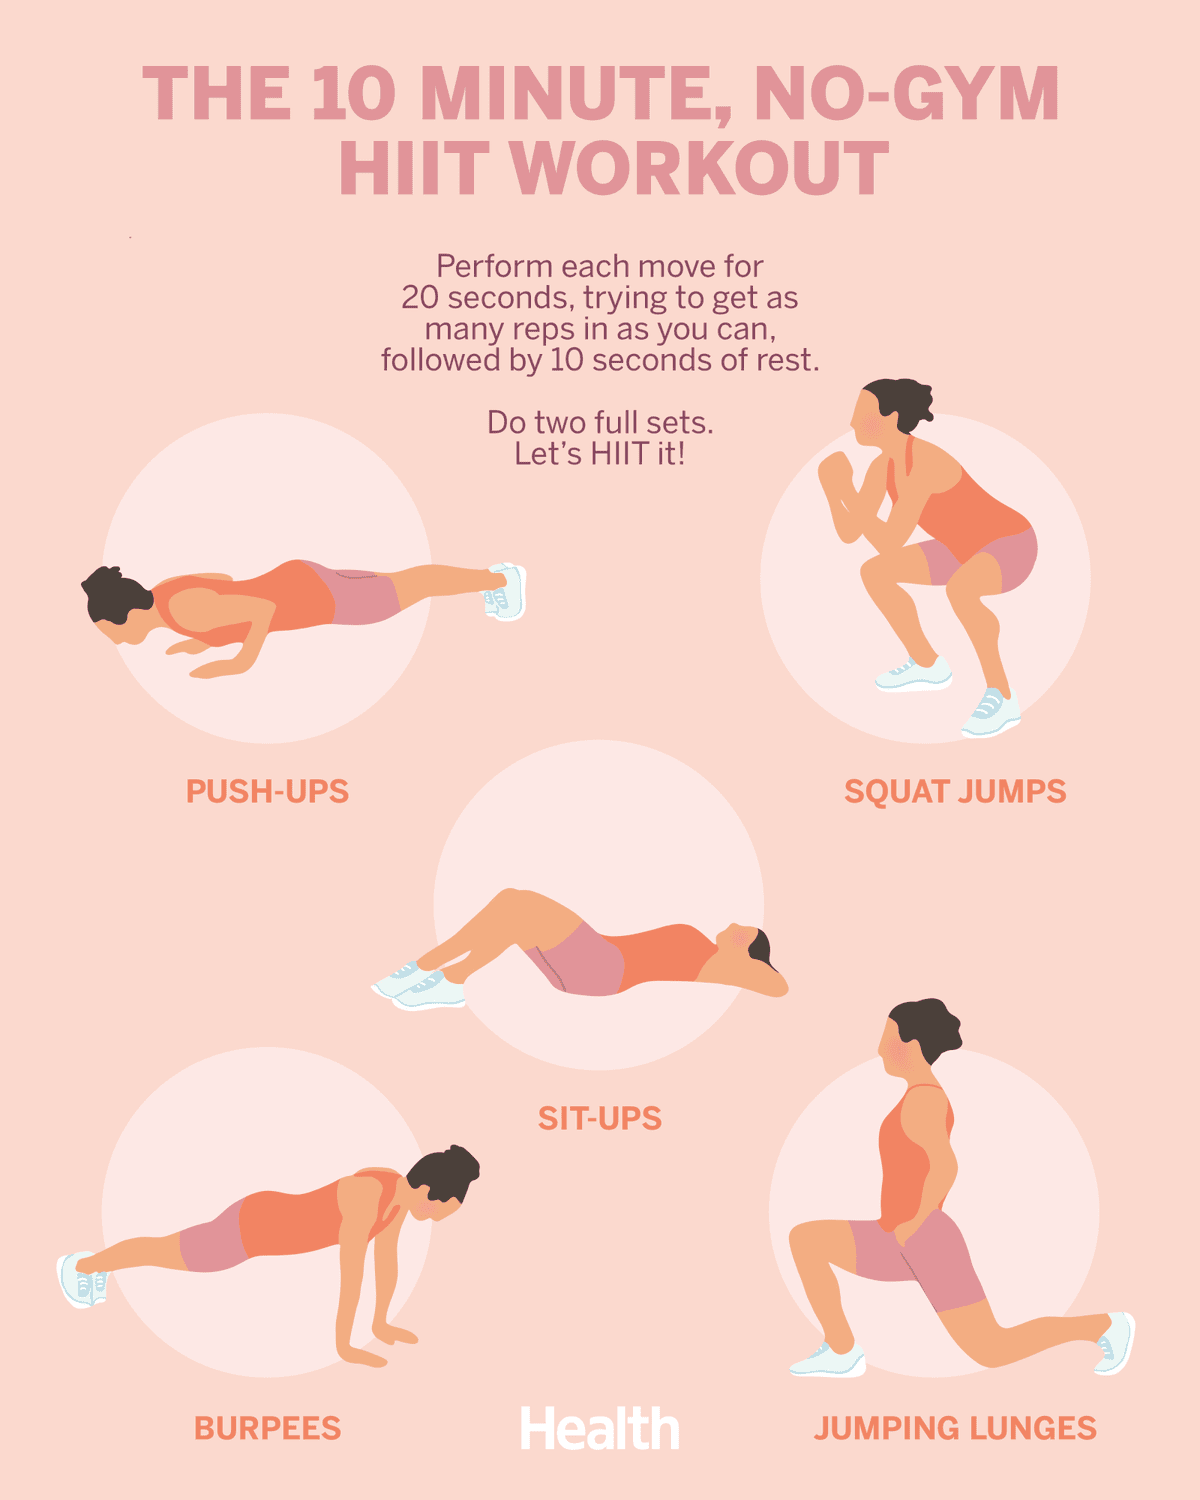 This No Gym Hiit Workout Gets The Job Done In 10 Minutes